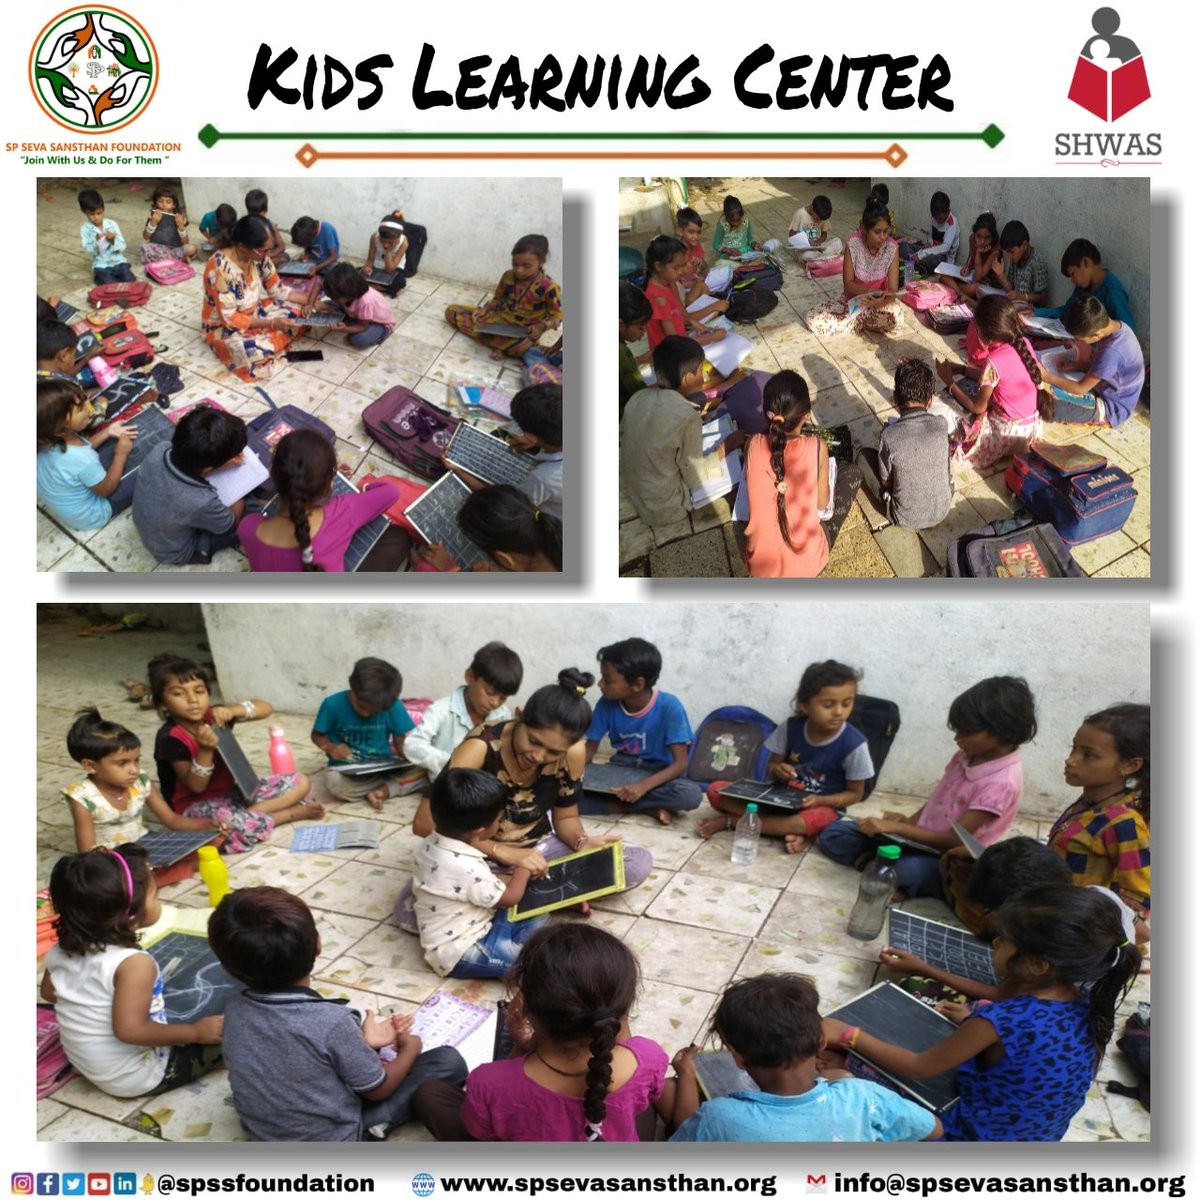 Our Kids Learning Center at #Ganeshnagar, #Jamnagar in #Gujarat with the help of Shwas Kids 

'Join With Us & Do For Them'

#spssfoundation #spsevasansthan  #Gujaratngo #jamnagarngo #csrindia  #ngoindia #education #slumeducation  #kidseducation #volunteers #childreneducation